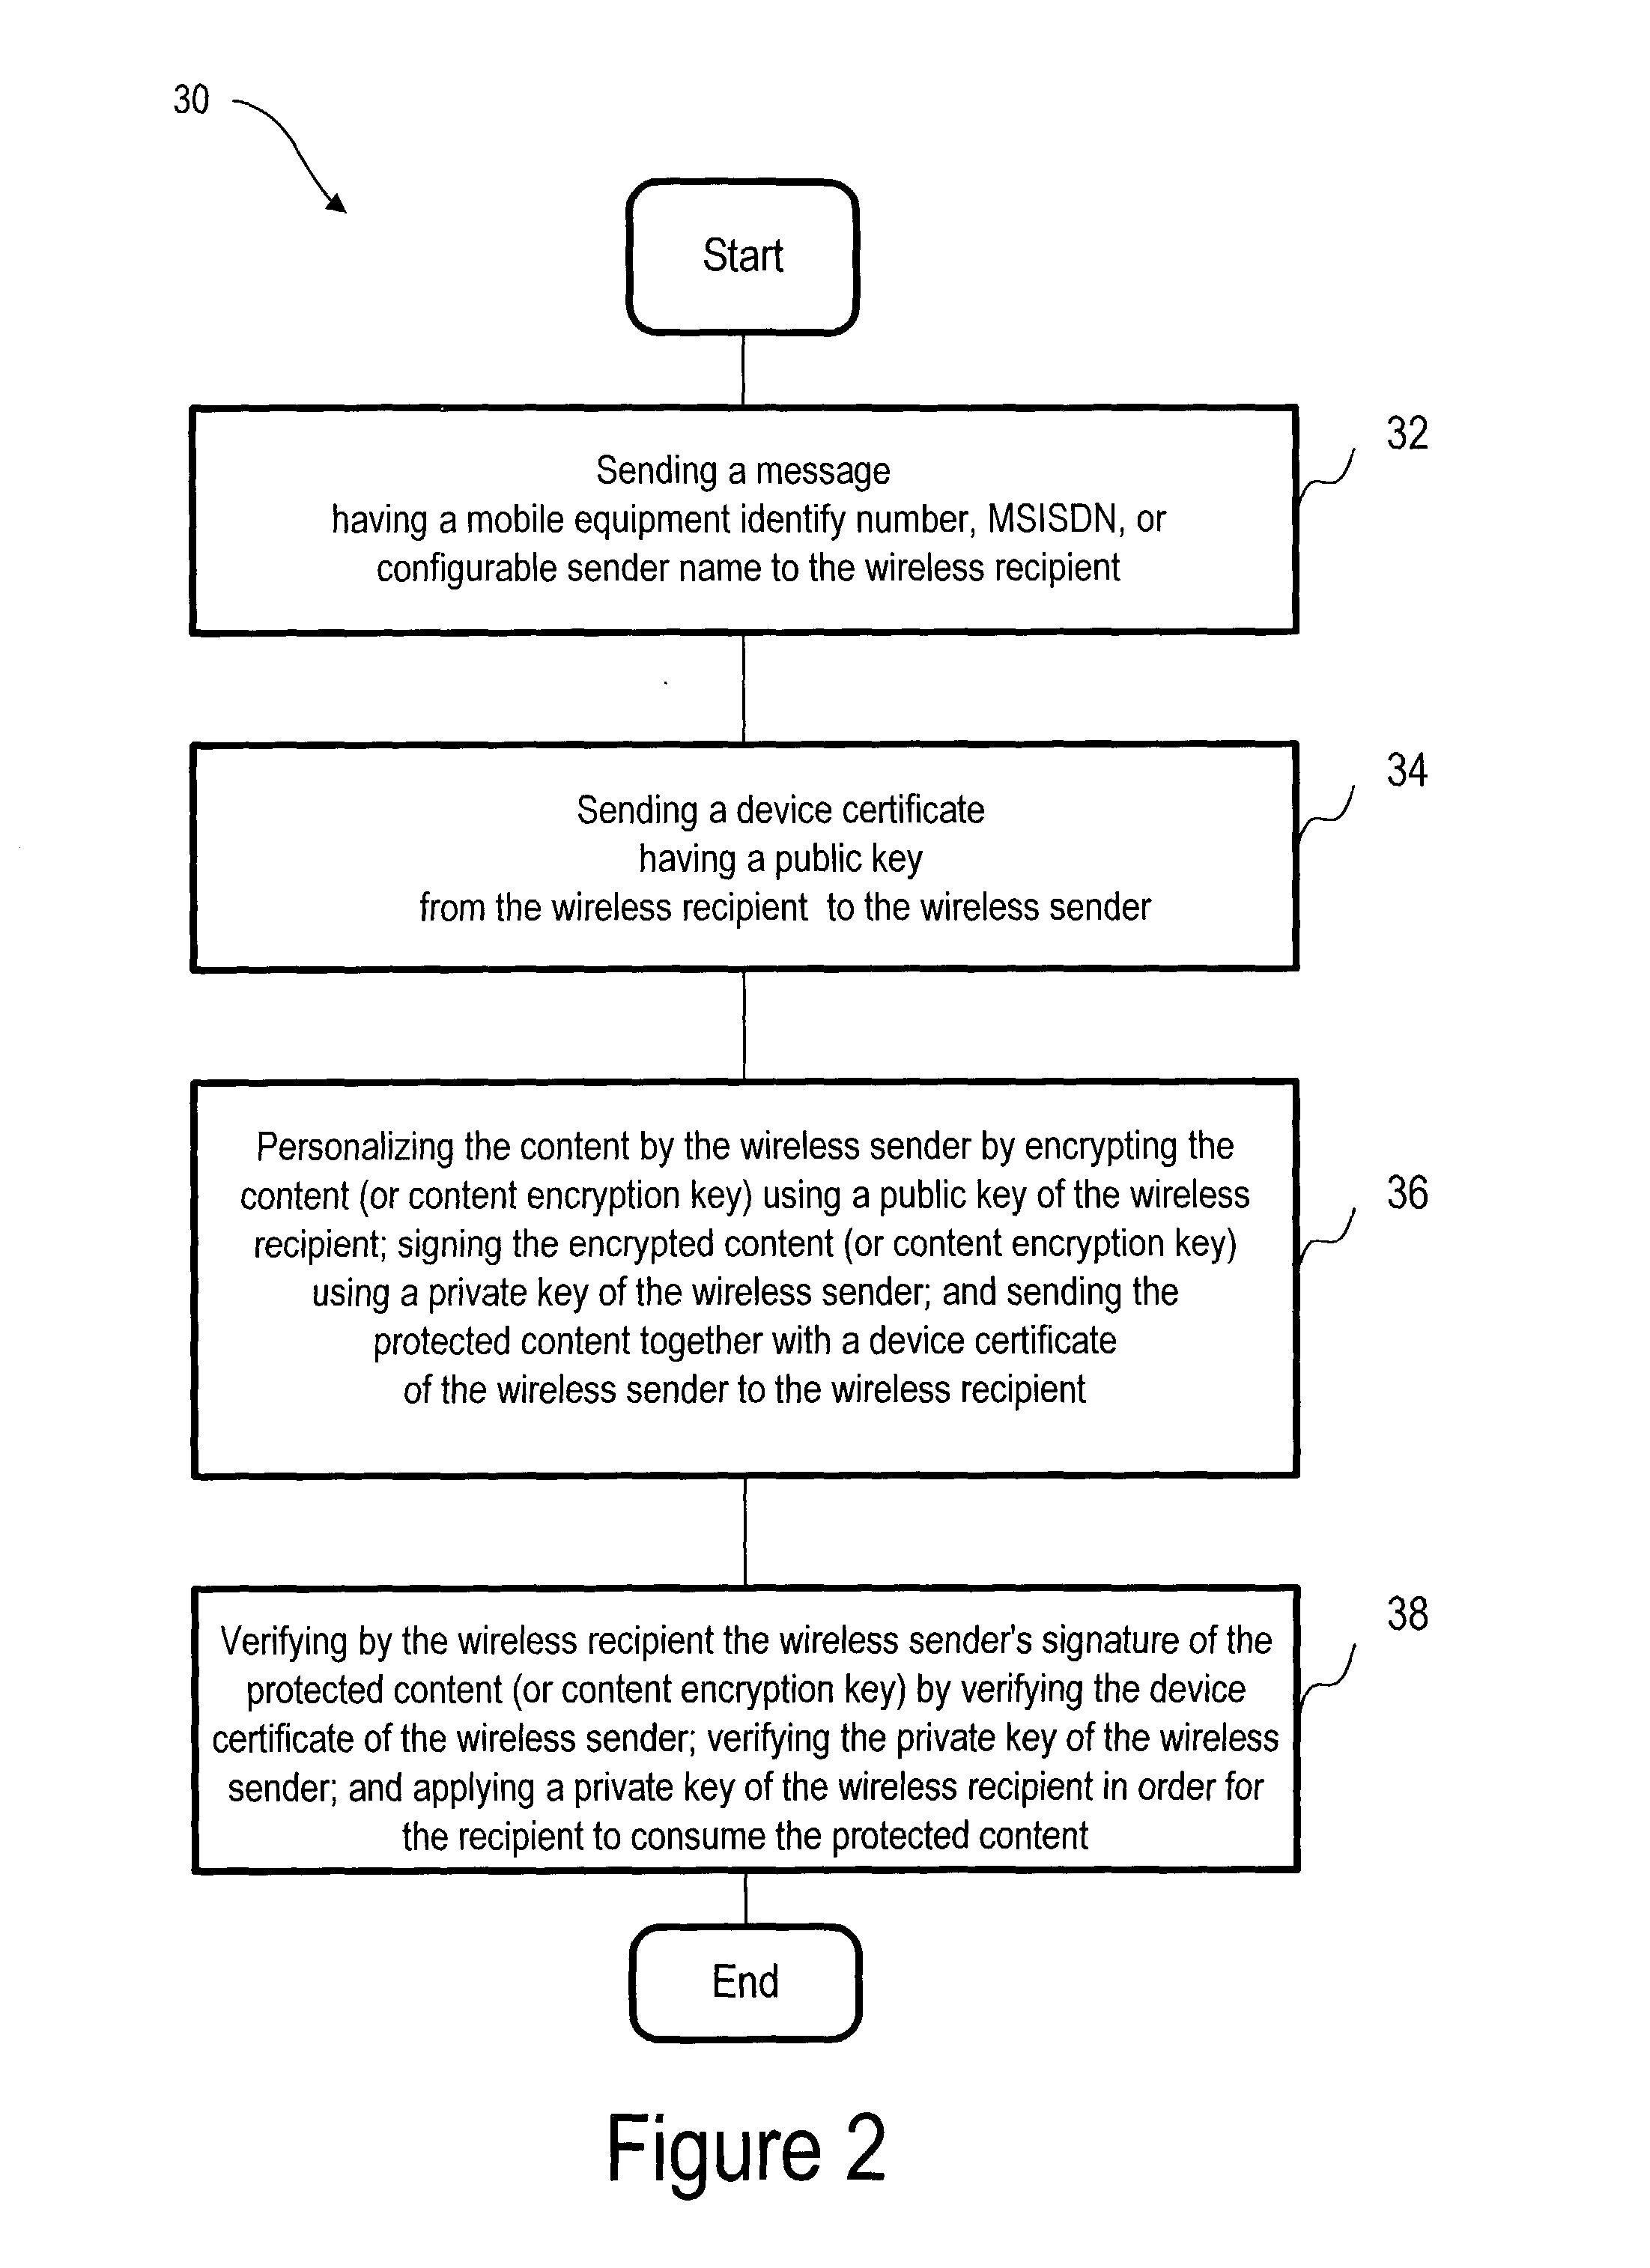 Method and apparatus for user-friendly peer-to-peer distribution of digital rights management protected content and mechanism for detecting illegal content distributors